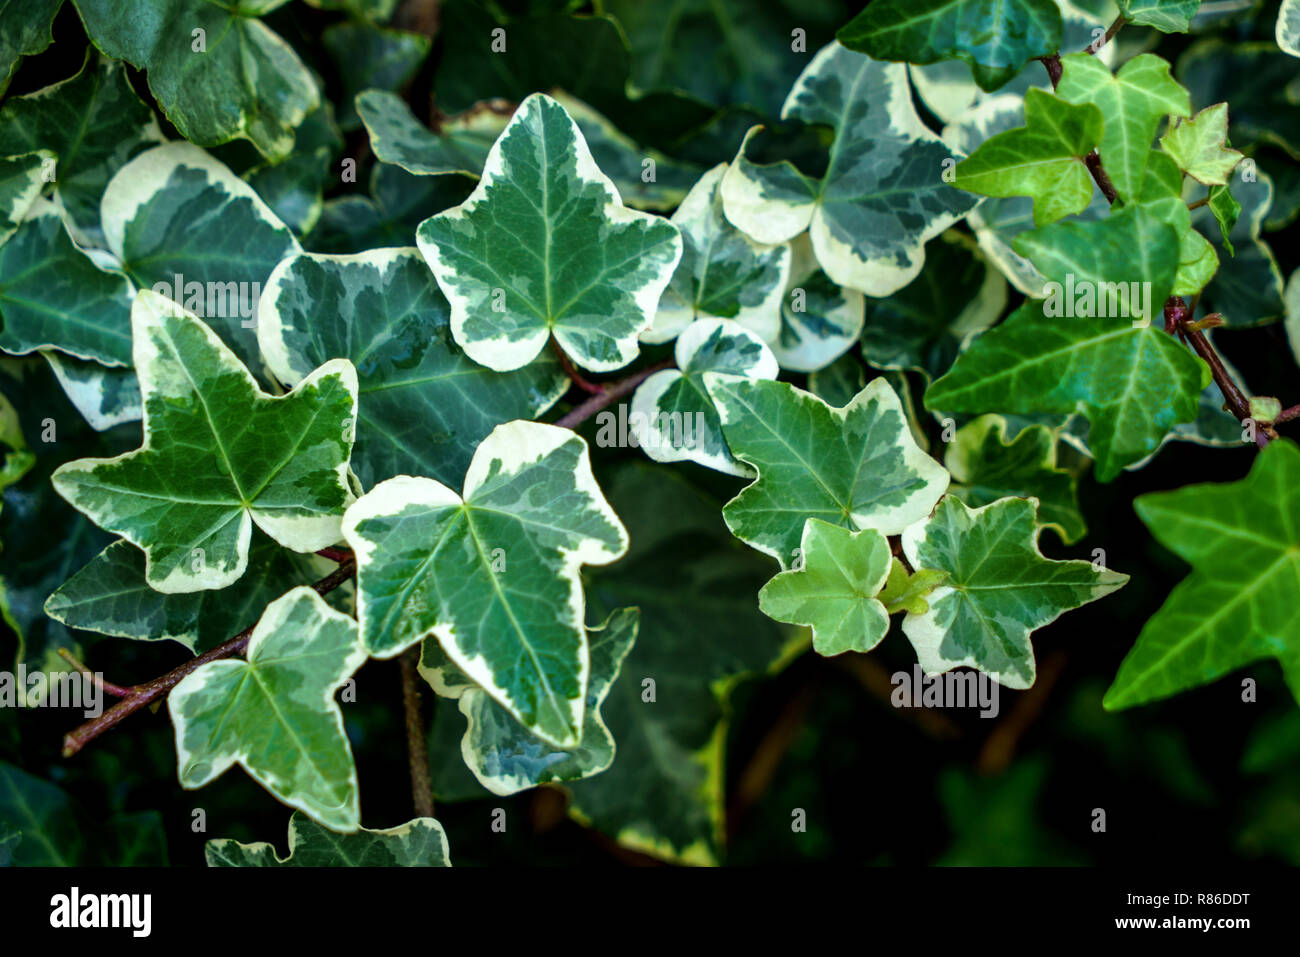 Macro of beautiful, lush green leaves of Common Ivy. Also known as Hedera helix, English ivy or European ivy. Stock Photo